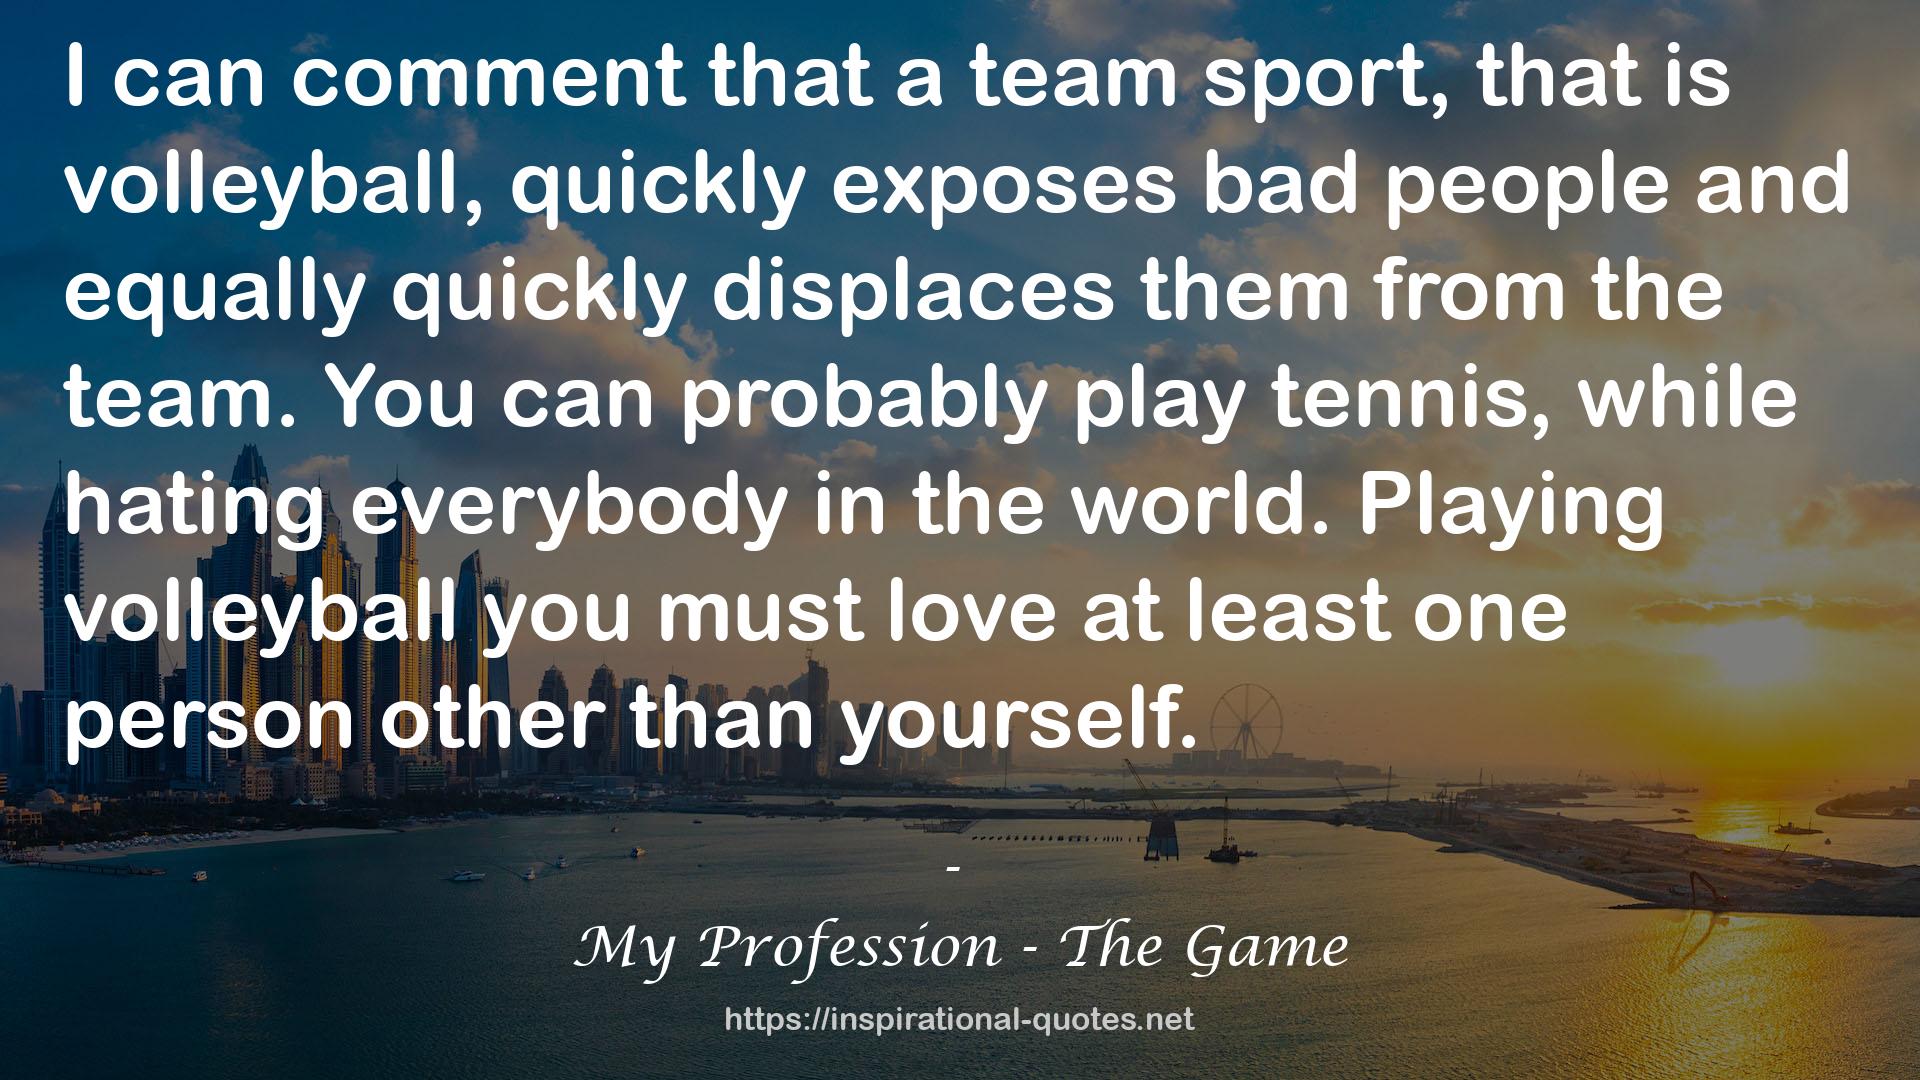 My Profession - The Game QUOTES